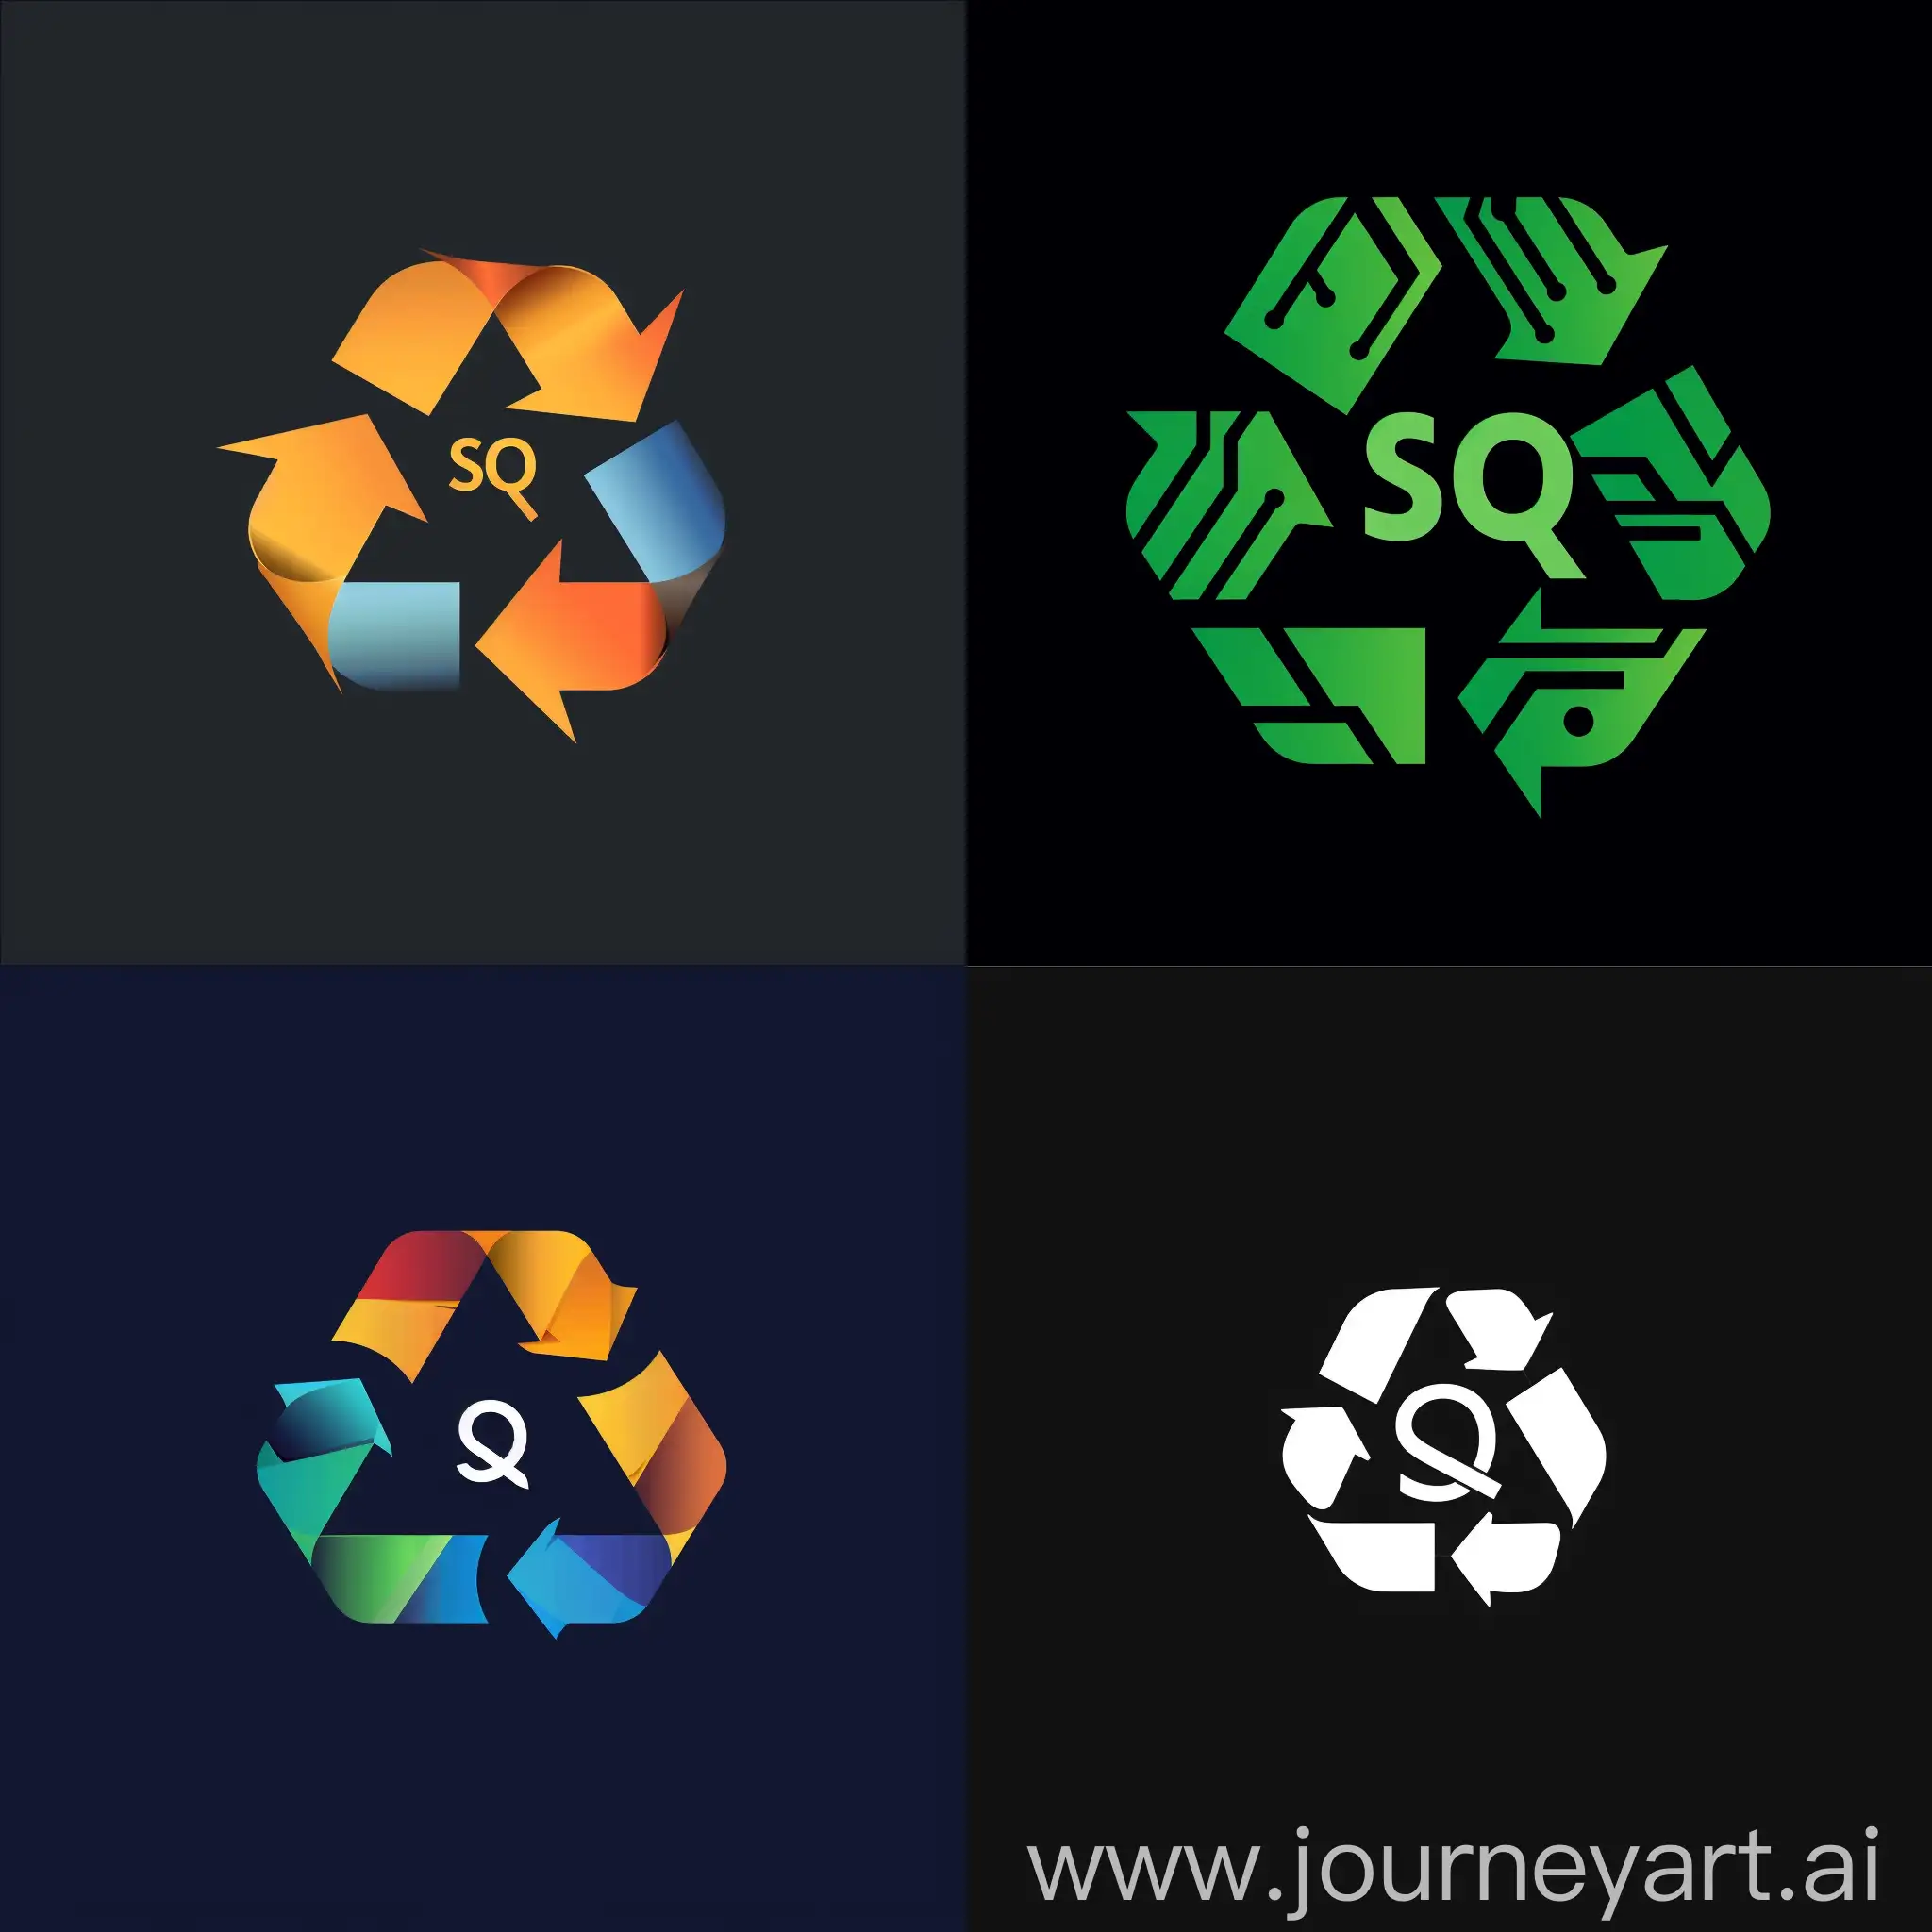 Create a logo of Electronic waste recycling name of the company is SQ